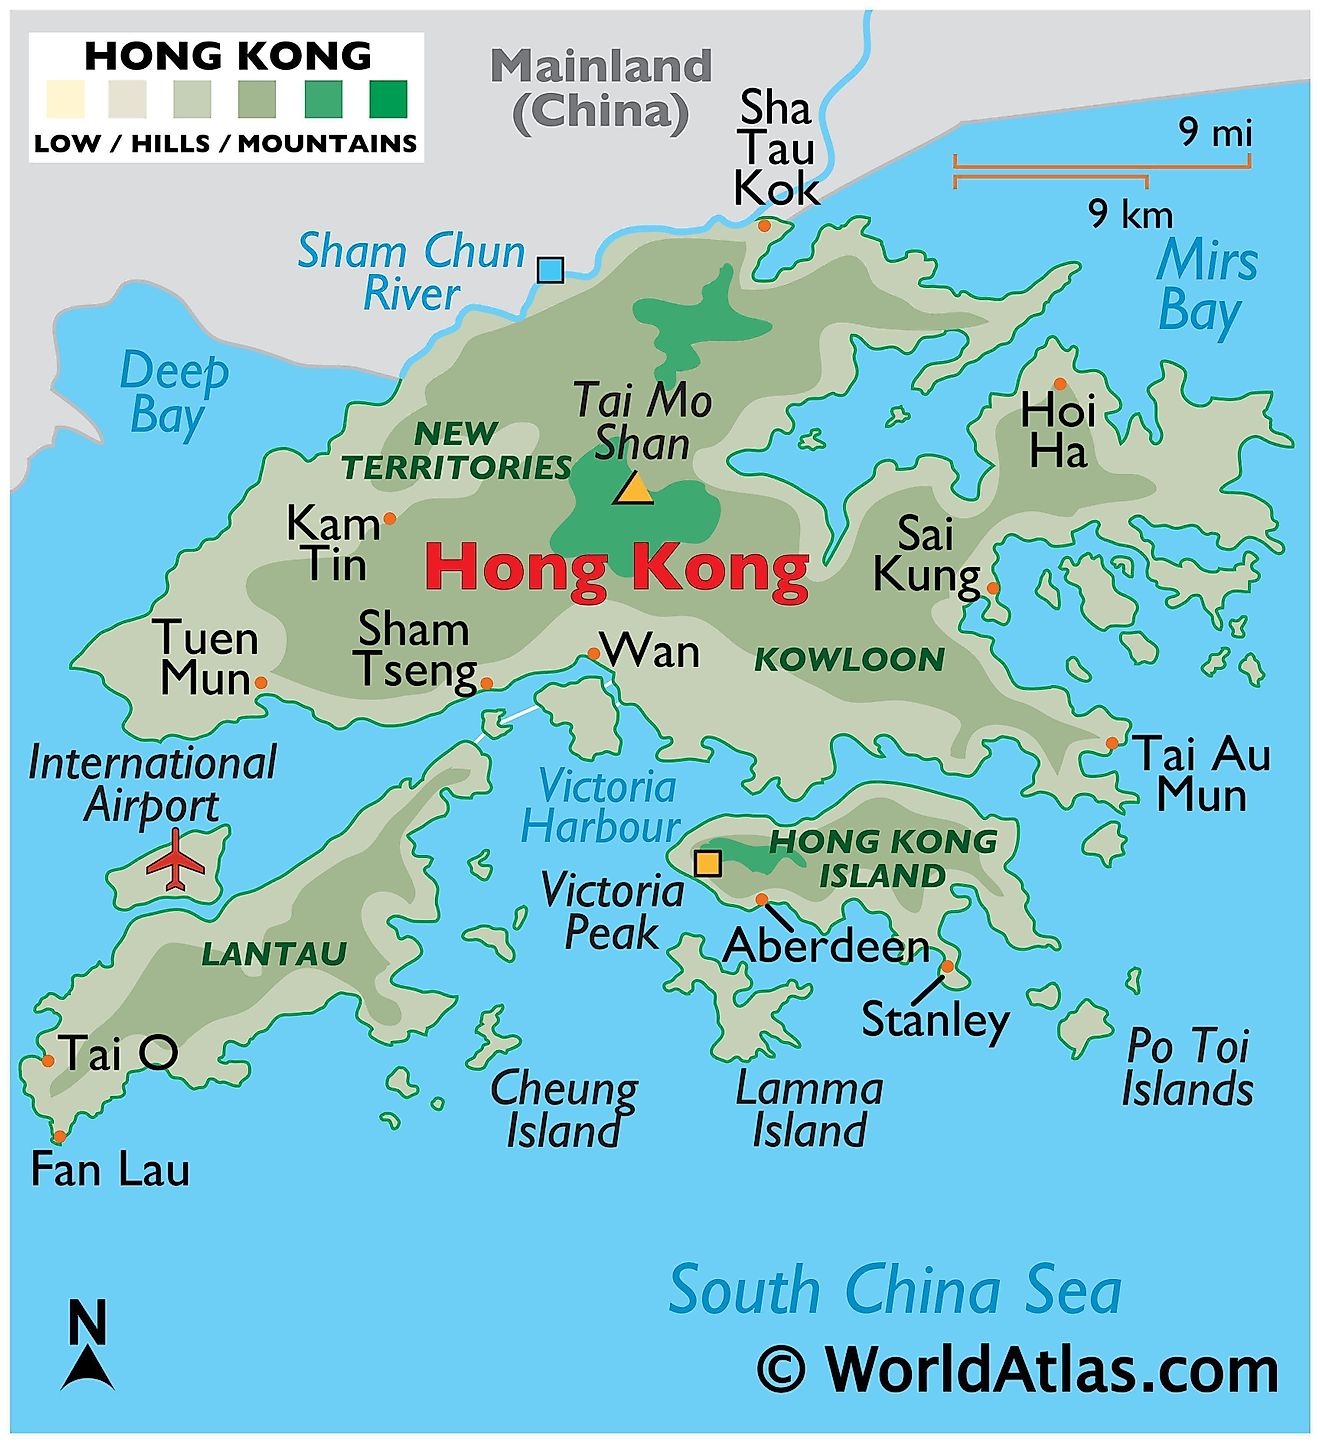 Physical Map of Hong Kong showing relief, highest point, major islands, urban centres, and more.